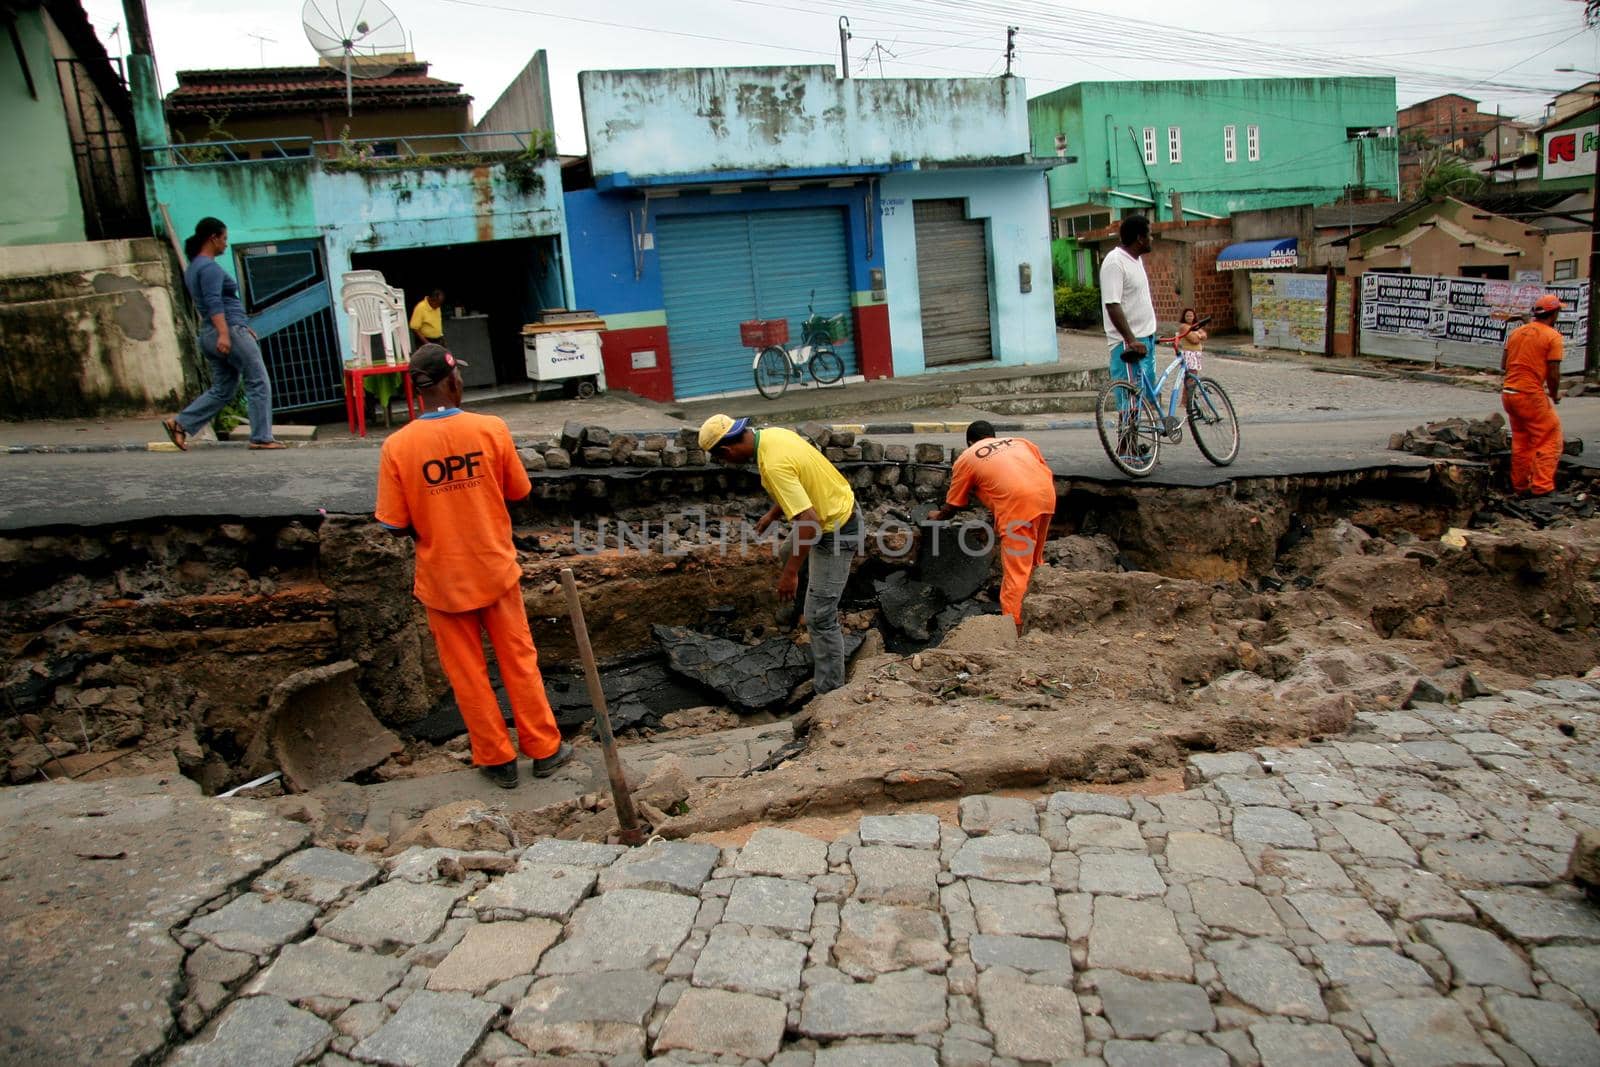 eunapolis, bahia / brazil - june 3, 2009: workers make repairs to rain-destroying street pavement in the city of Eunapolis, in southern Bahia.

